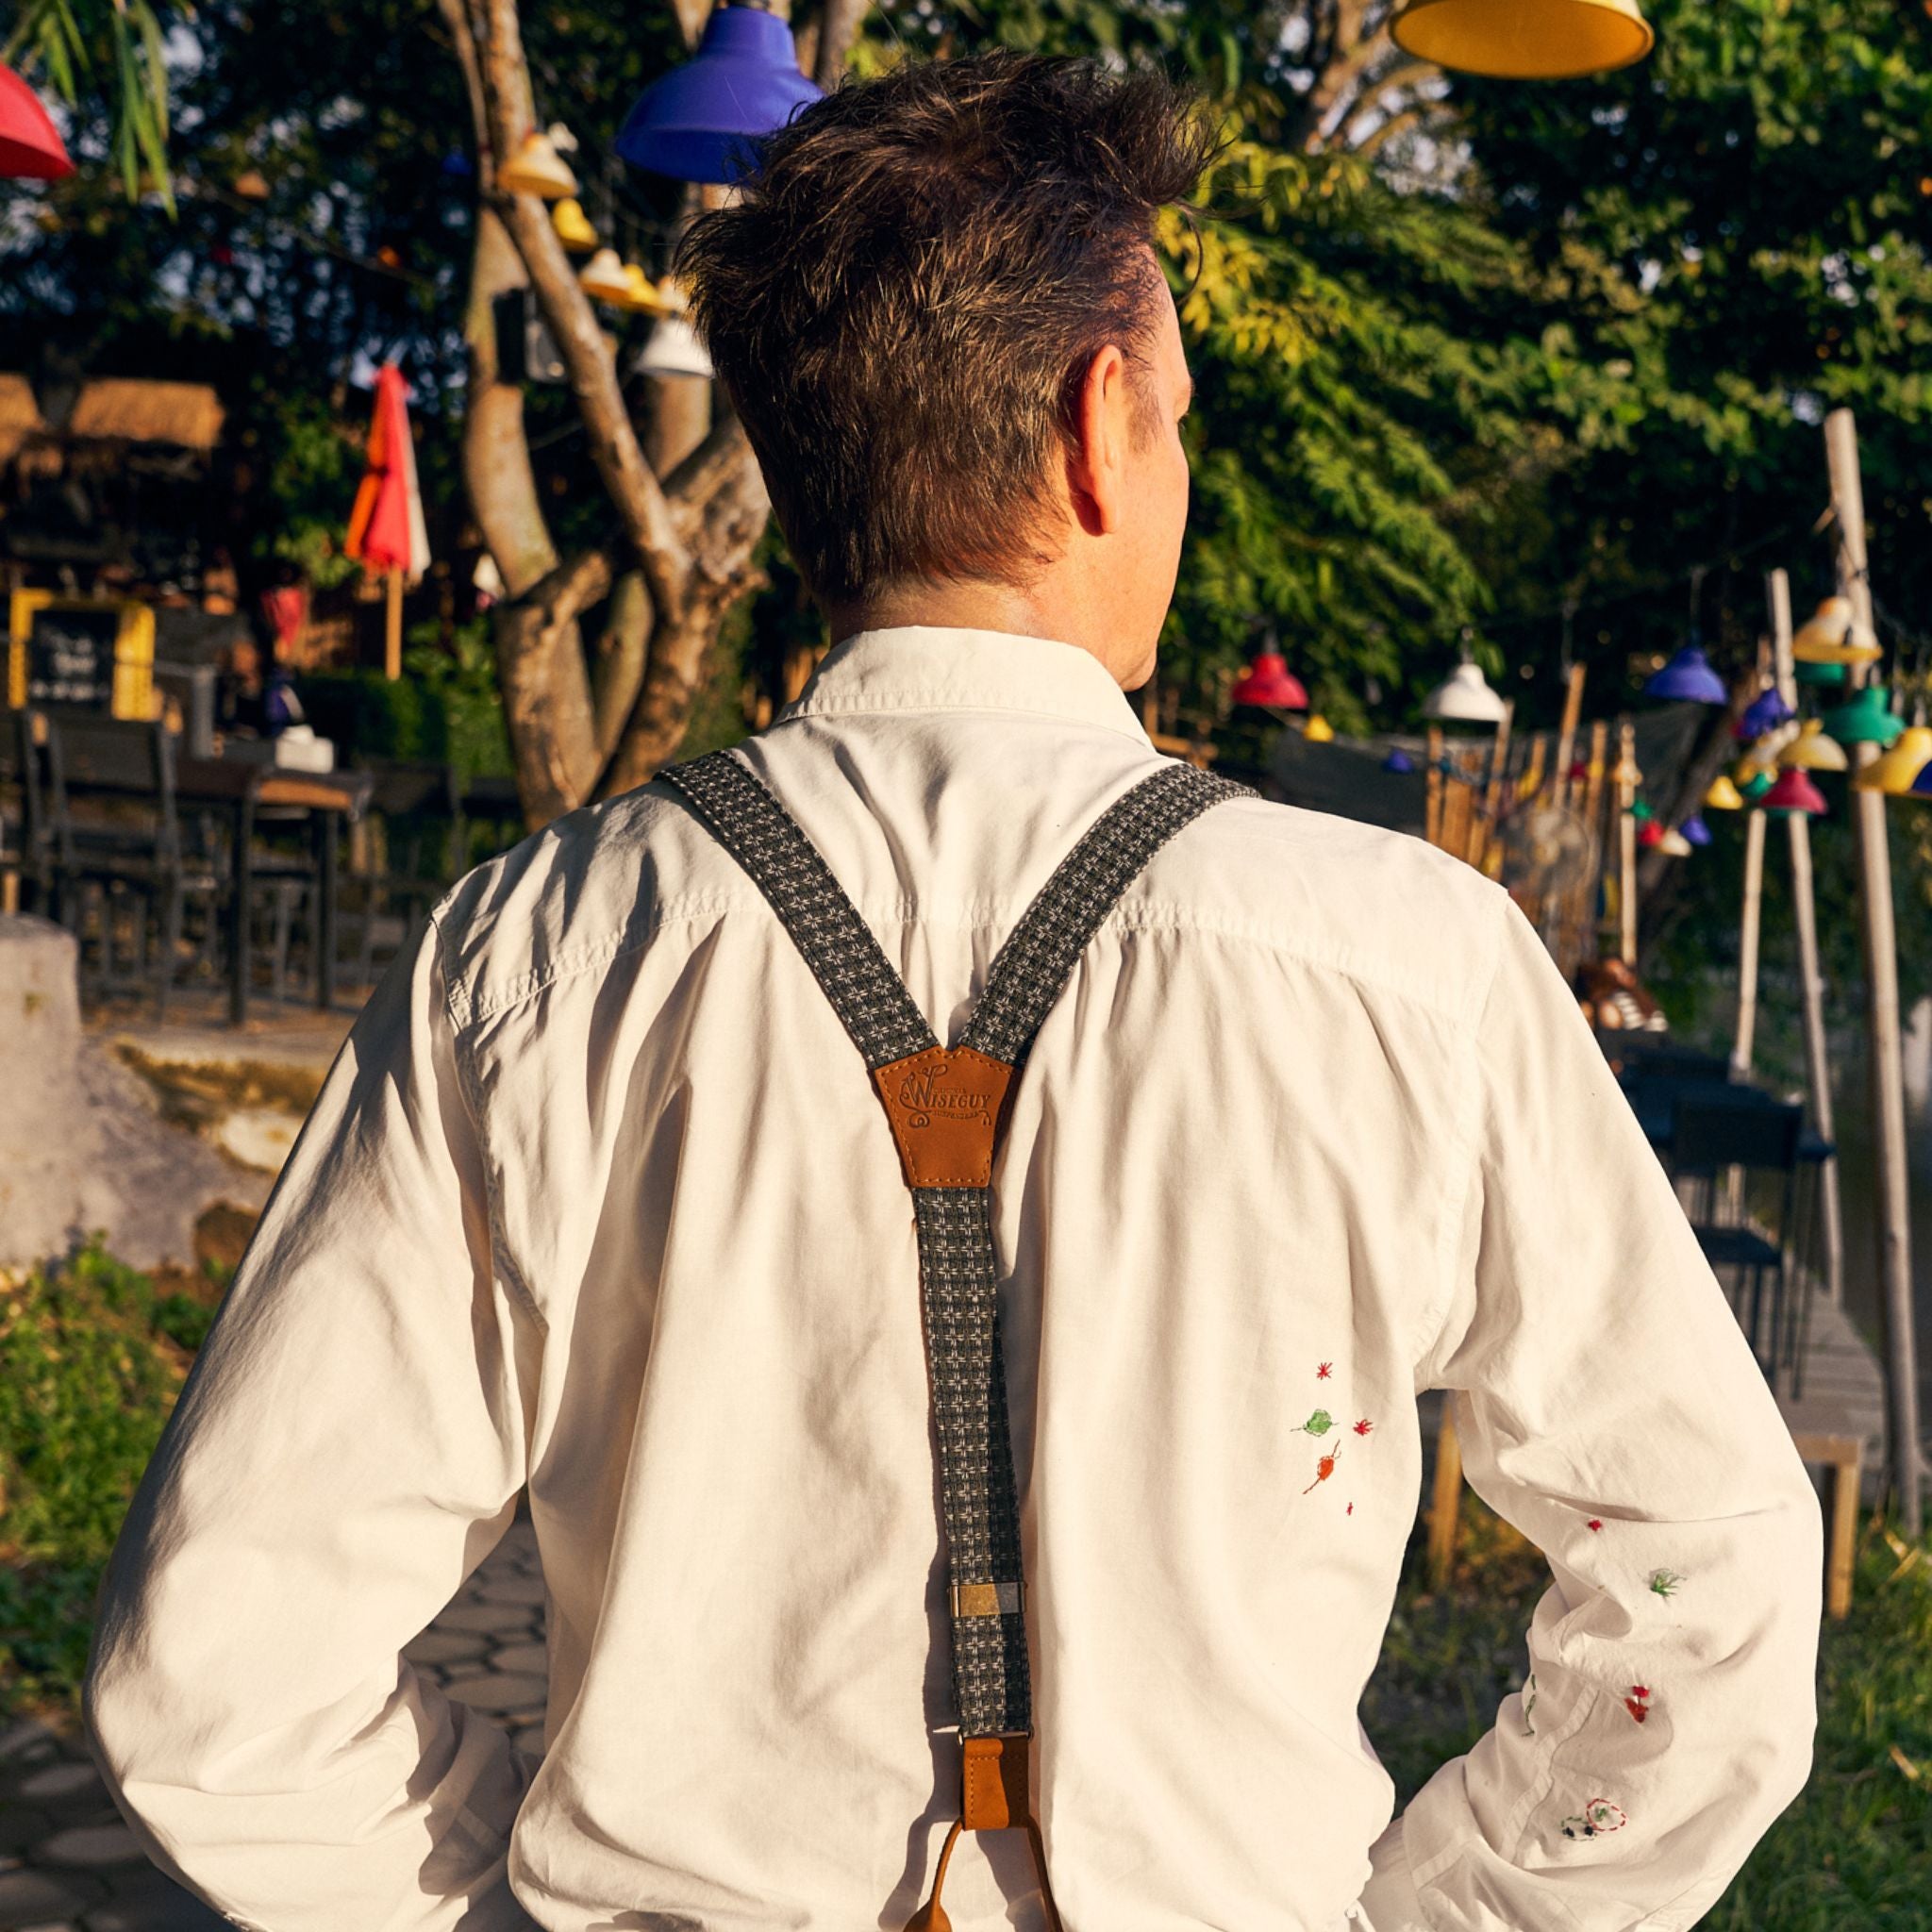 Back of man, he's wearing a white shirt and a pair of Wiseguy Original Suspenders with a pattern.